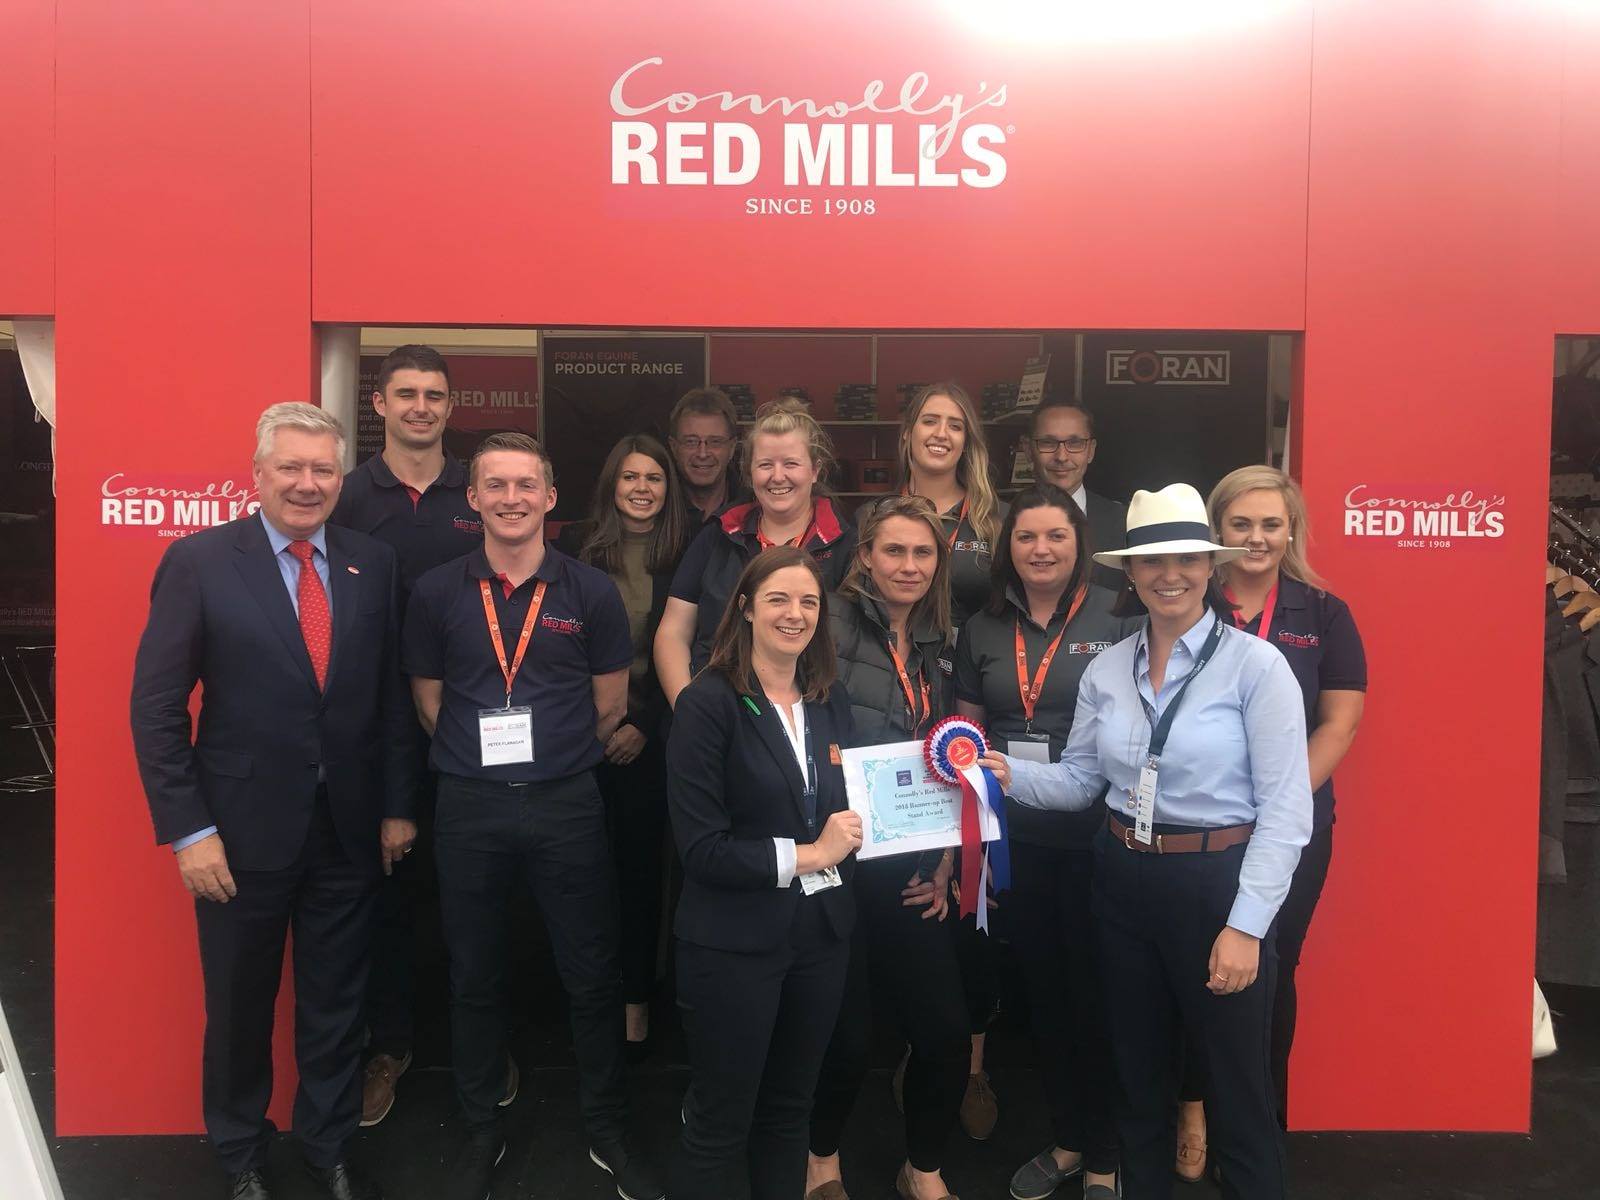 Success all around for #redmills at the 2018 Dublin Horse Show